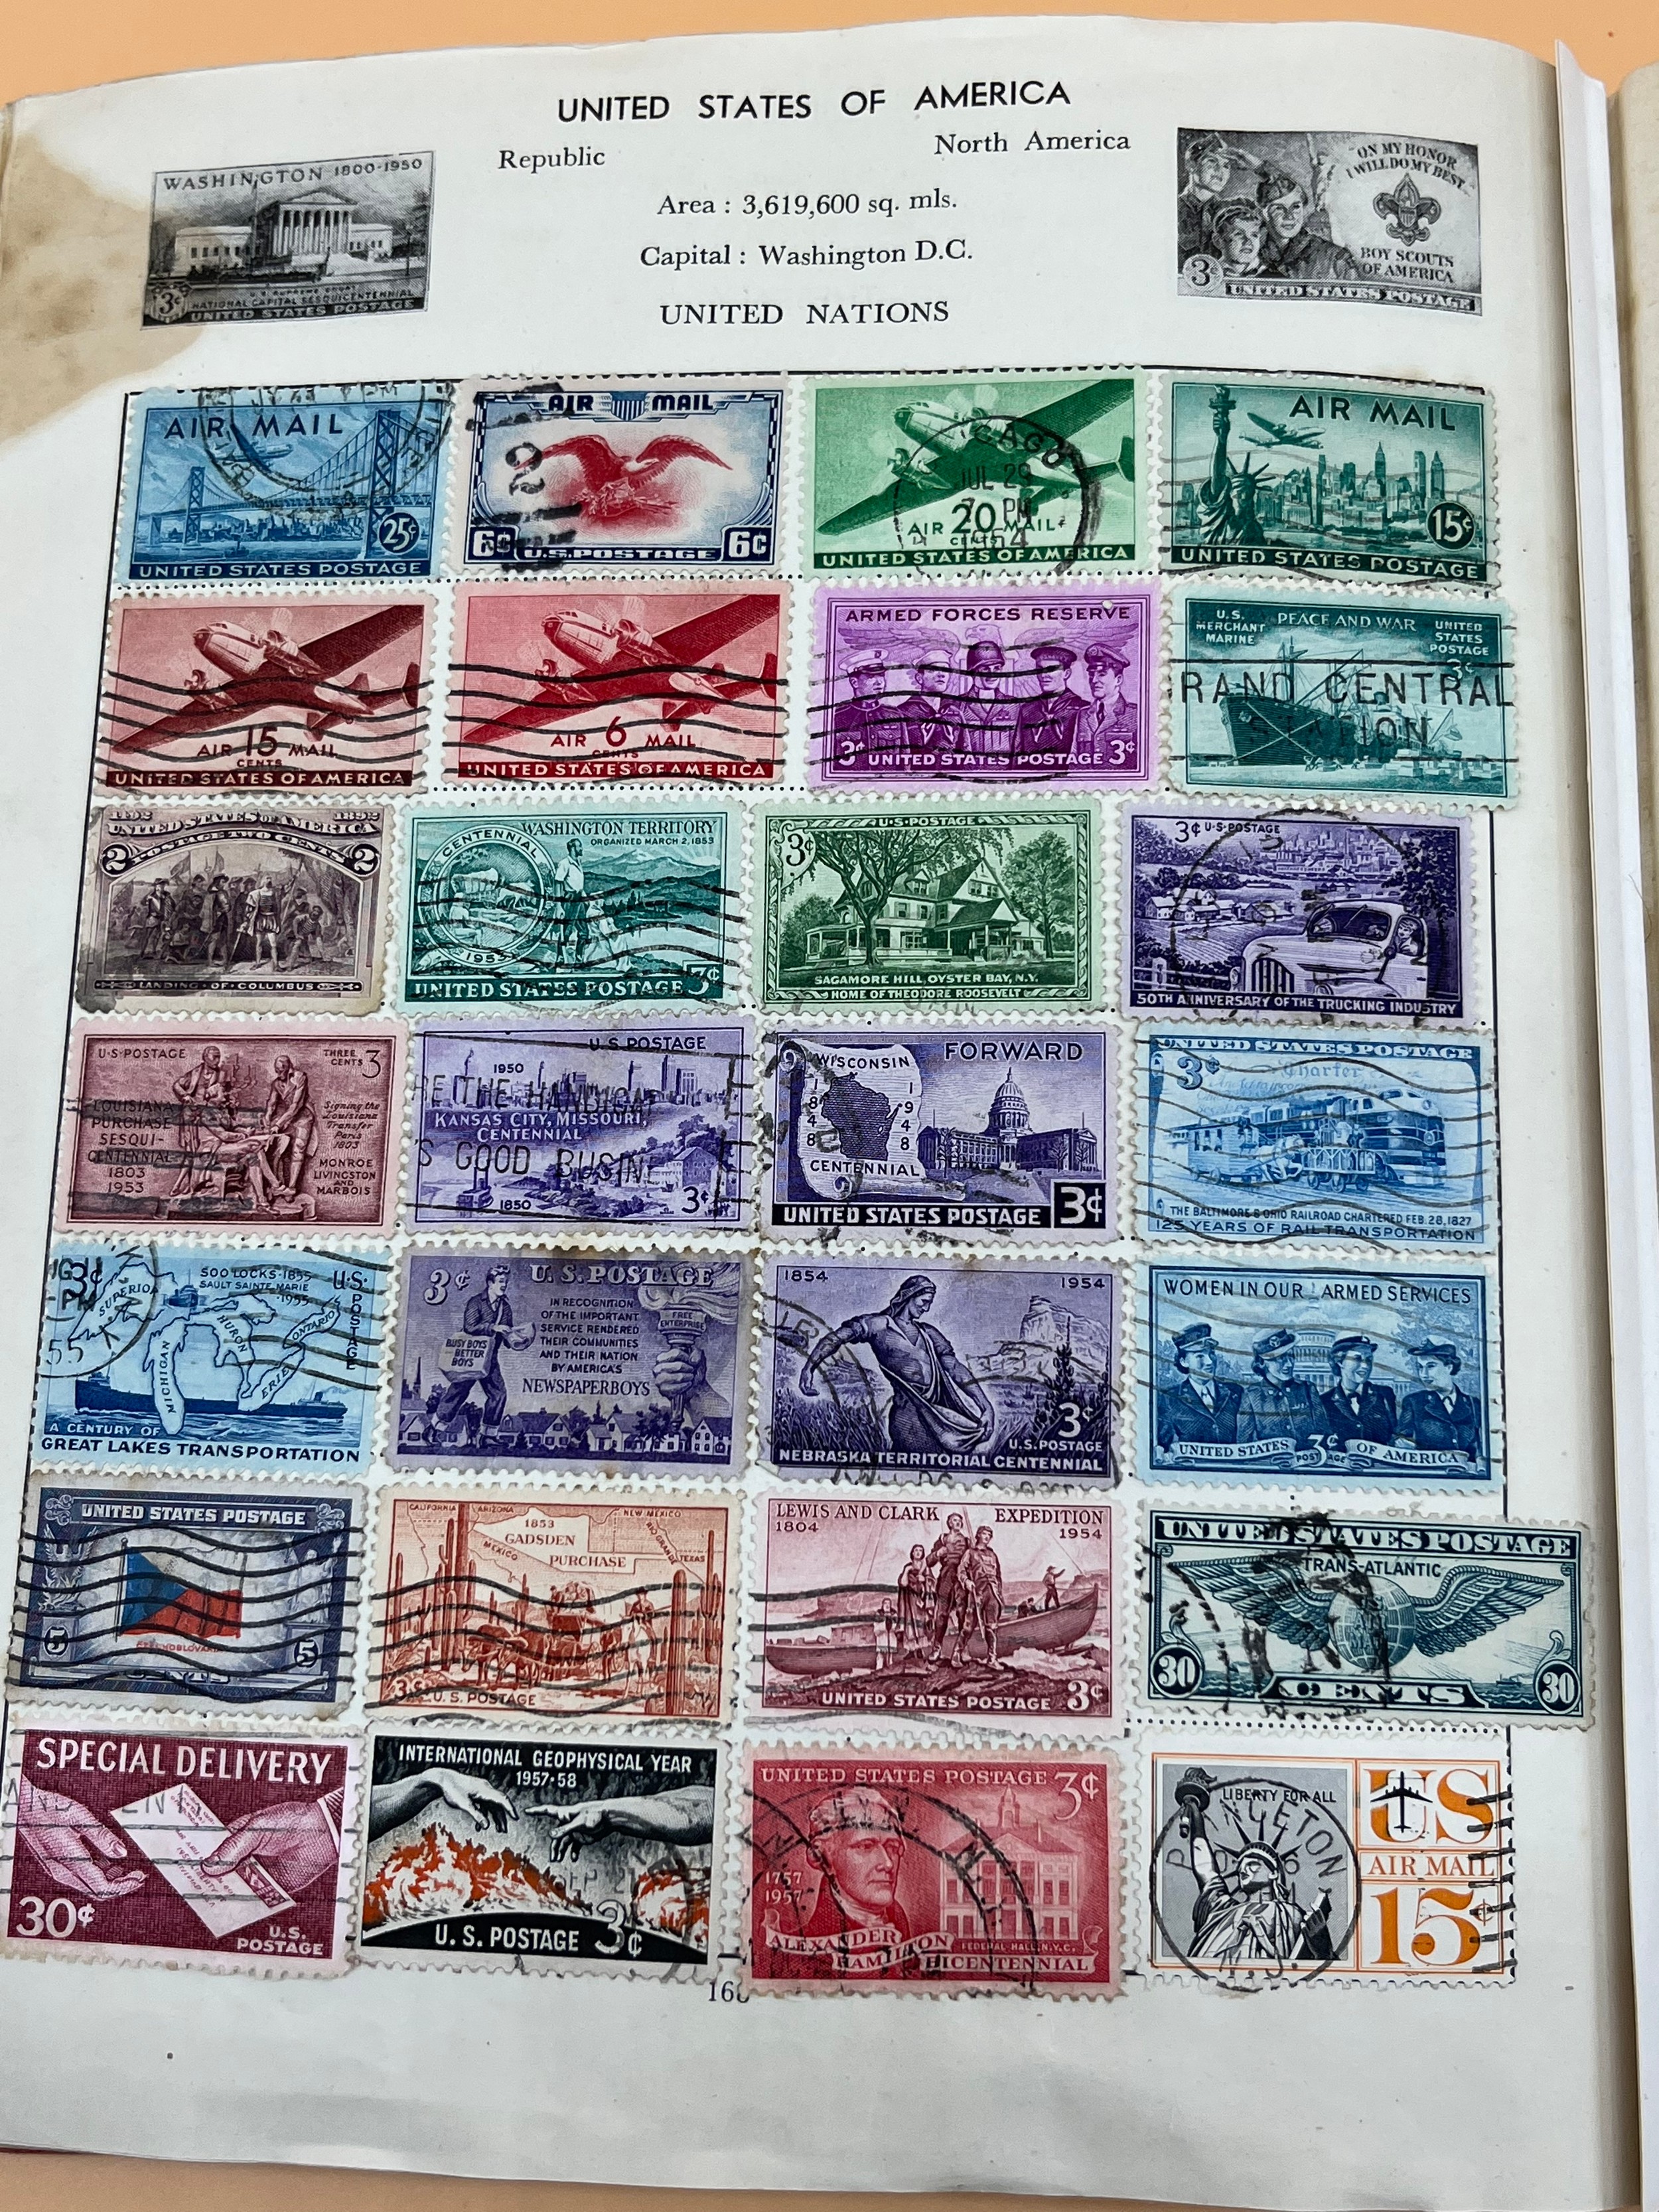 Vintage stamp album containing a collection of world stamps - Image 19 of 22